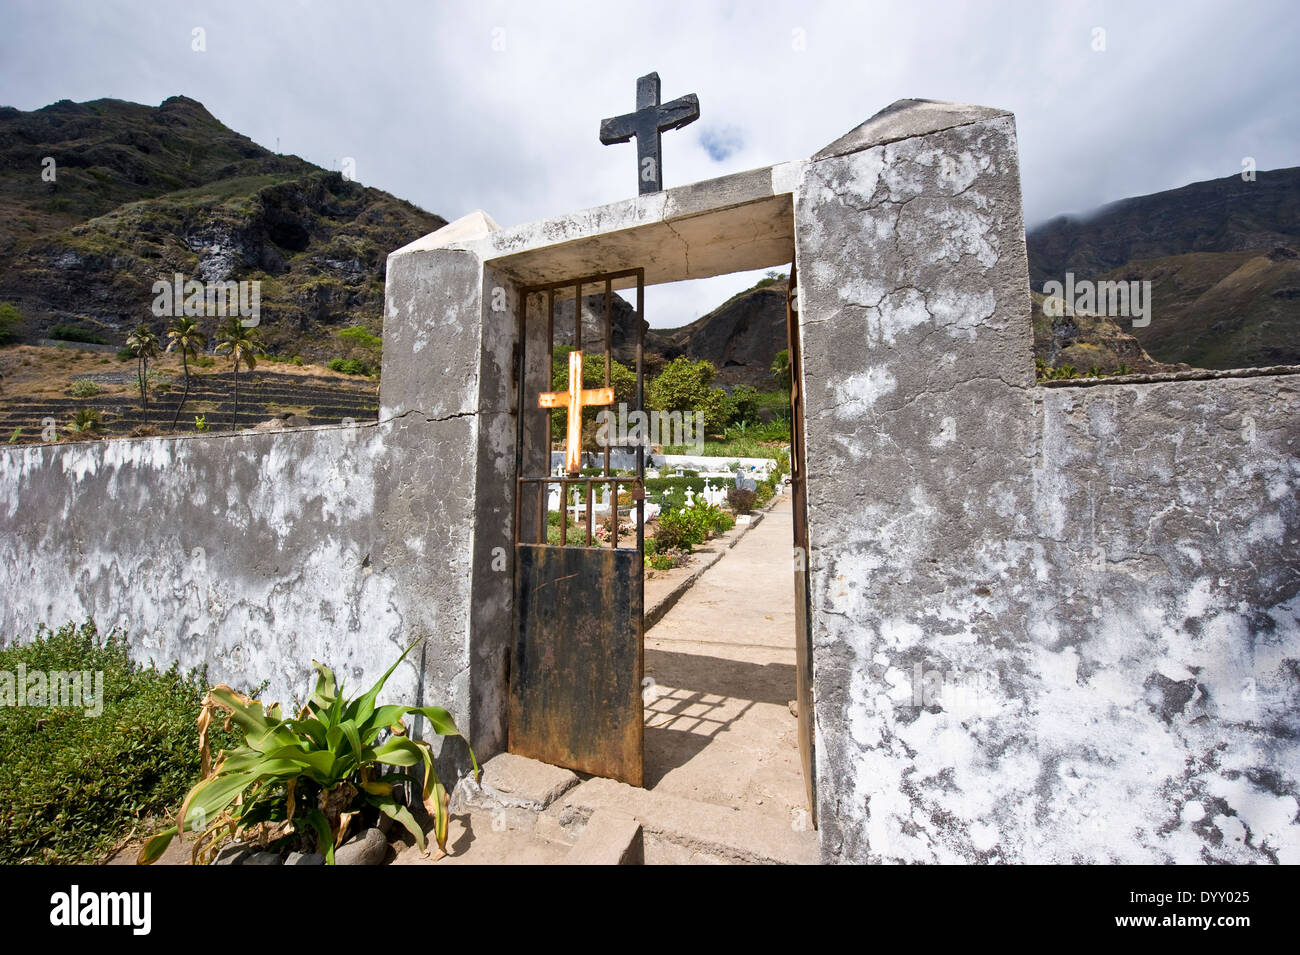 A settlement called Paul on the eastern coast of Santo Antao in Cabo Verde archipelago off the Africa coast. Stock Photo